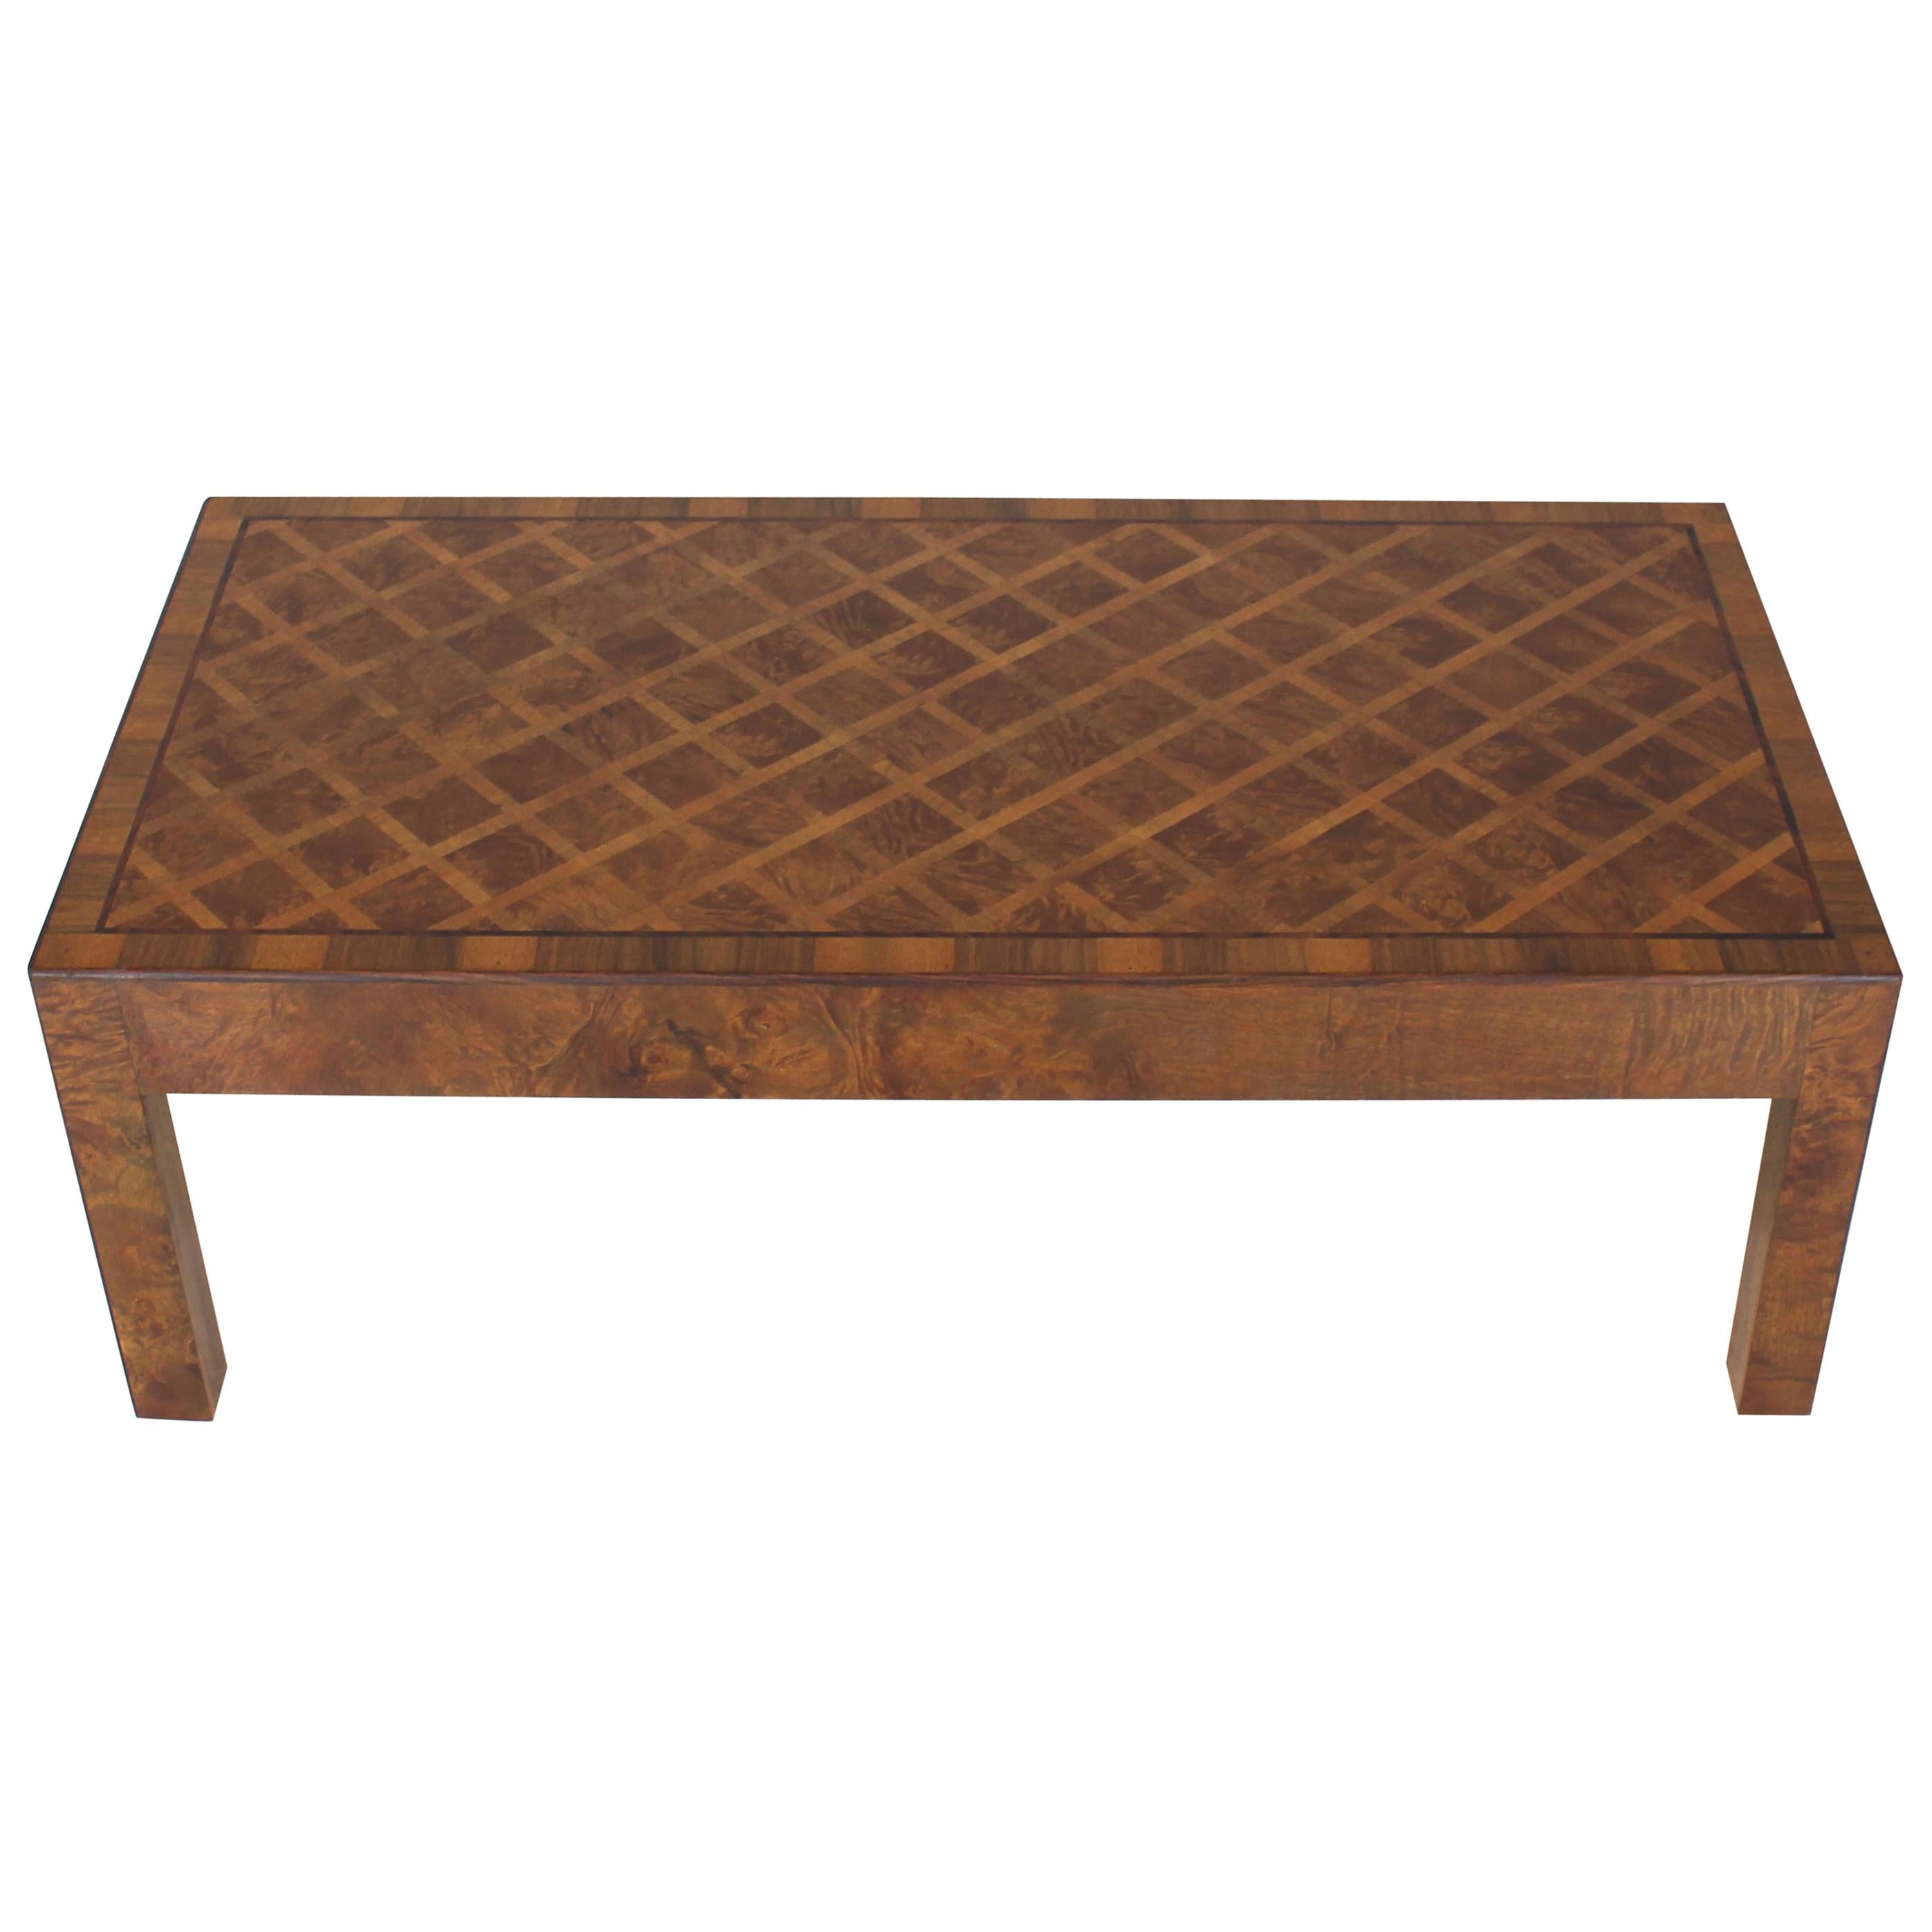 Burl Wood Marquetry Italian Modern Rectangle Coffee Table on Square Legs